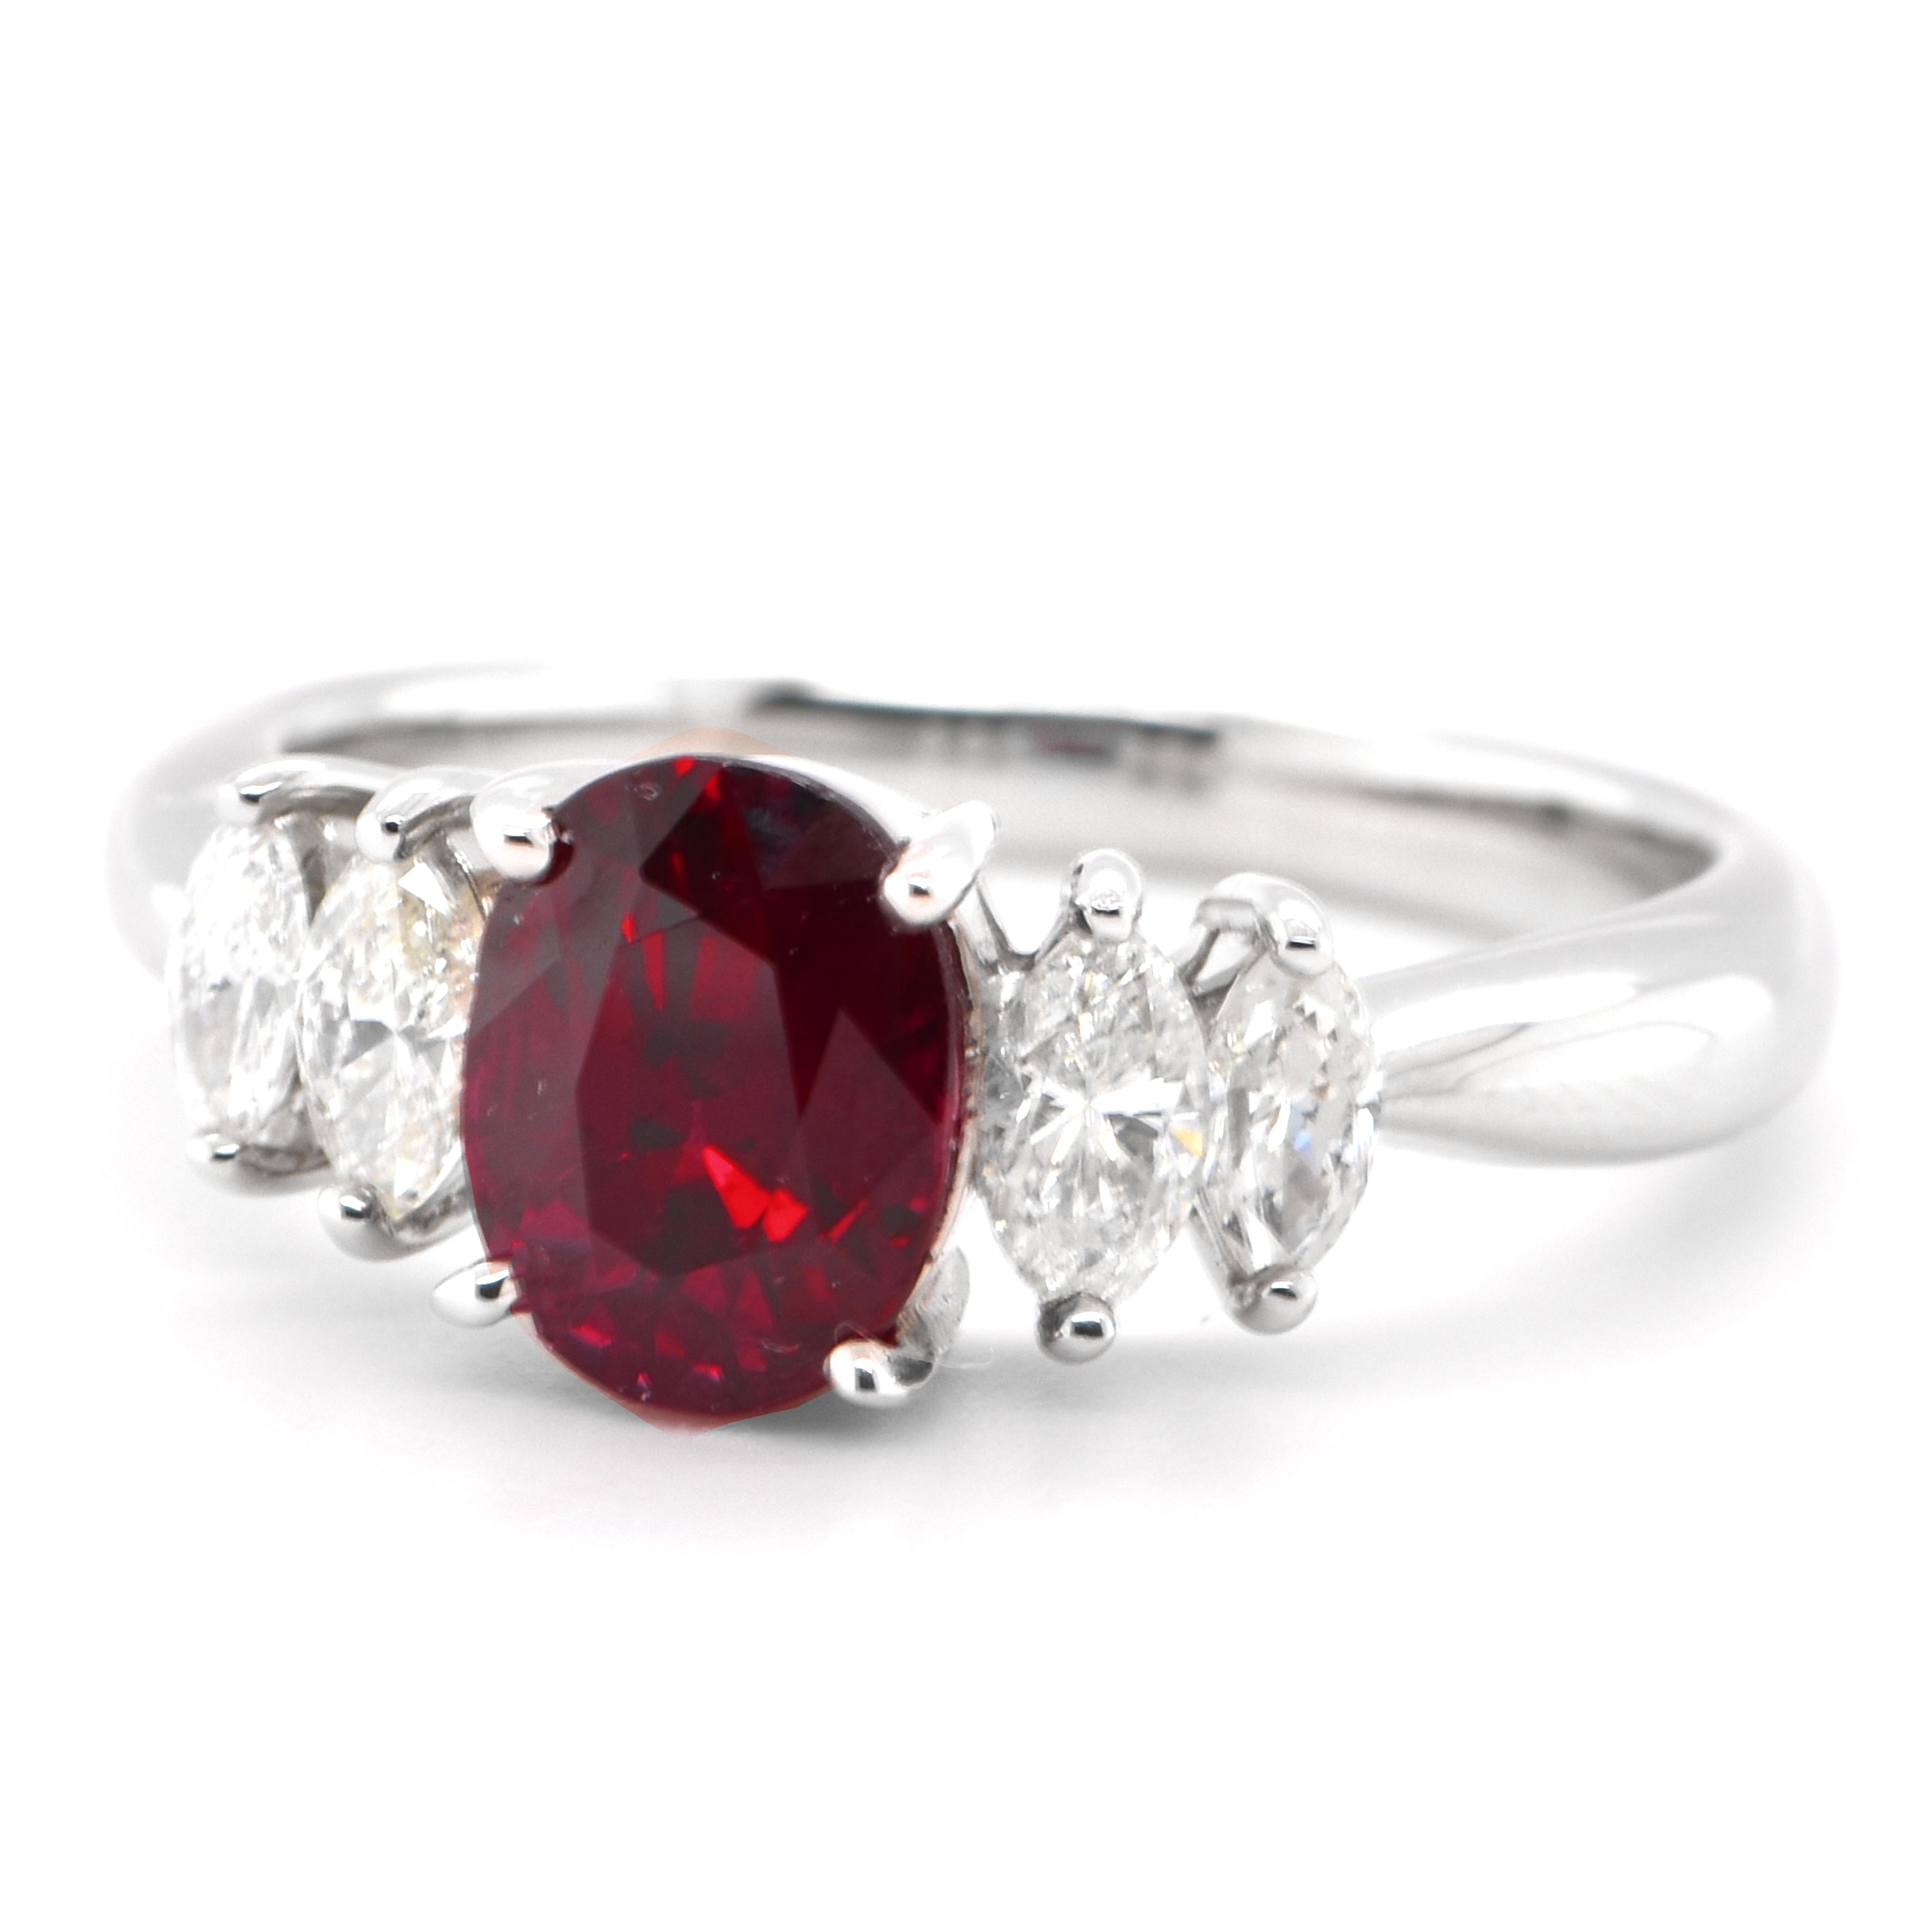 A beautiful ring set in Platinum featuring a AIGS Certified 1.96 Carat Natural Thailand Pigeon Blood Ruby and 0.70 Carat Diamond. Rubies are referred to as 